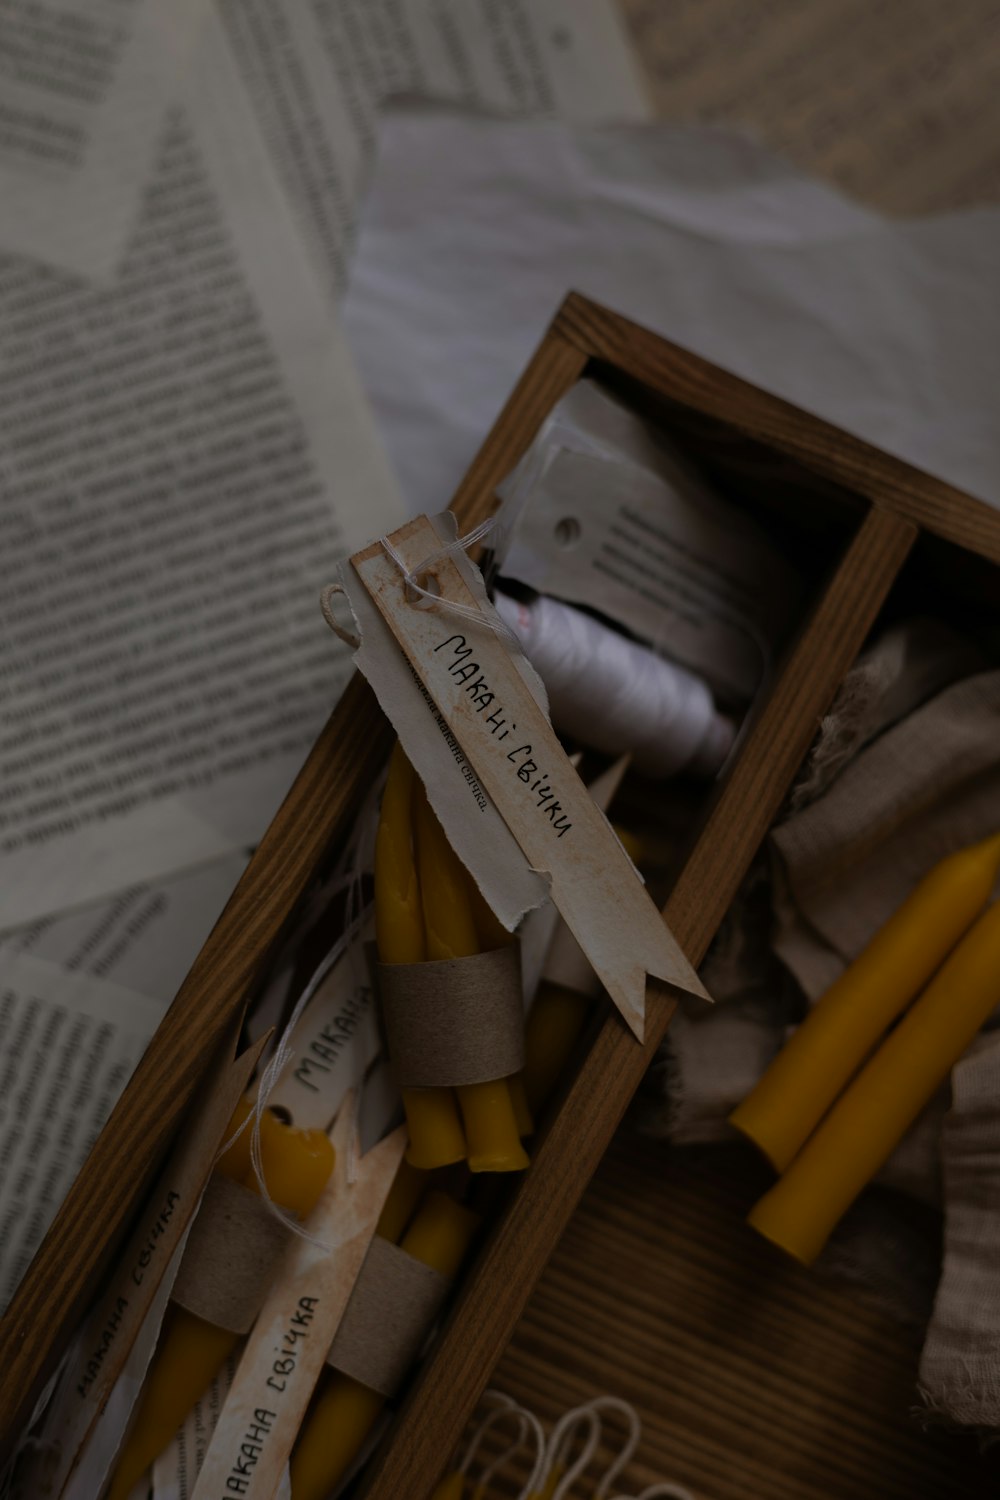 a wooden box filled with yellow candles next to a book